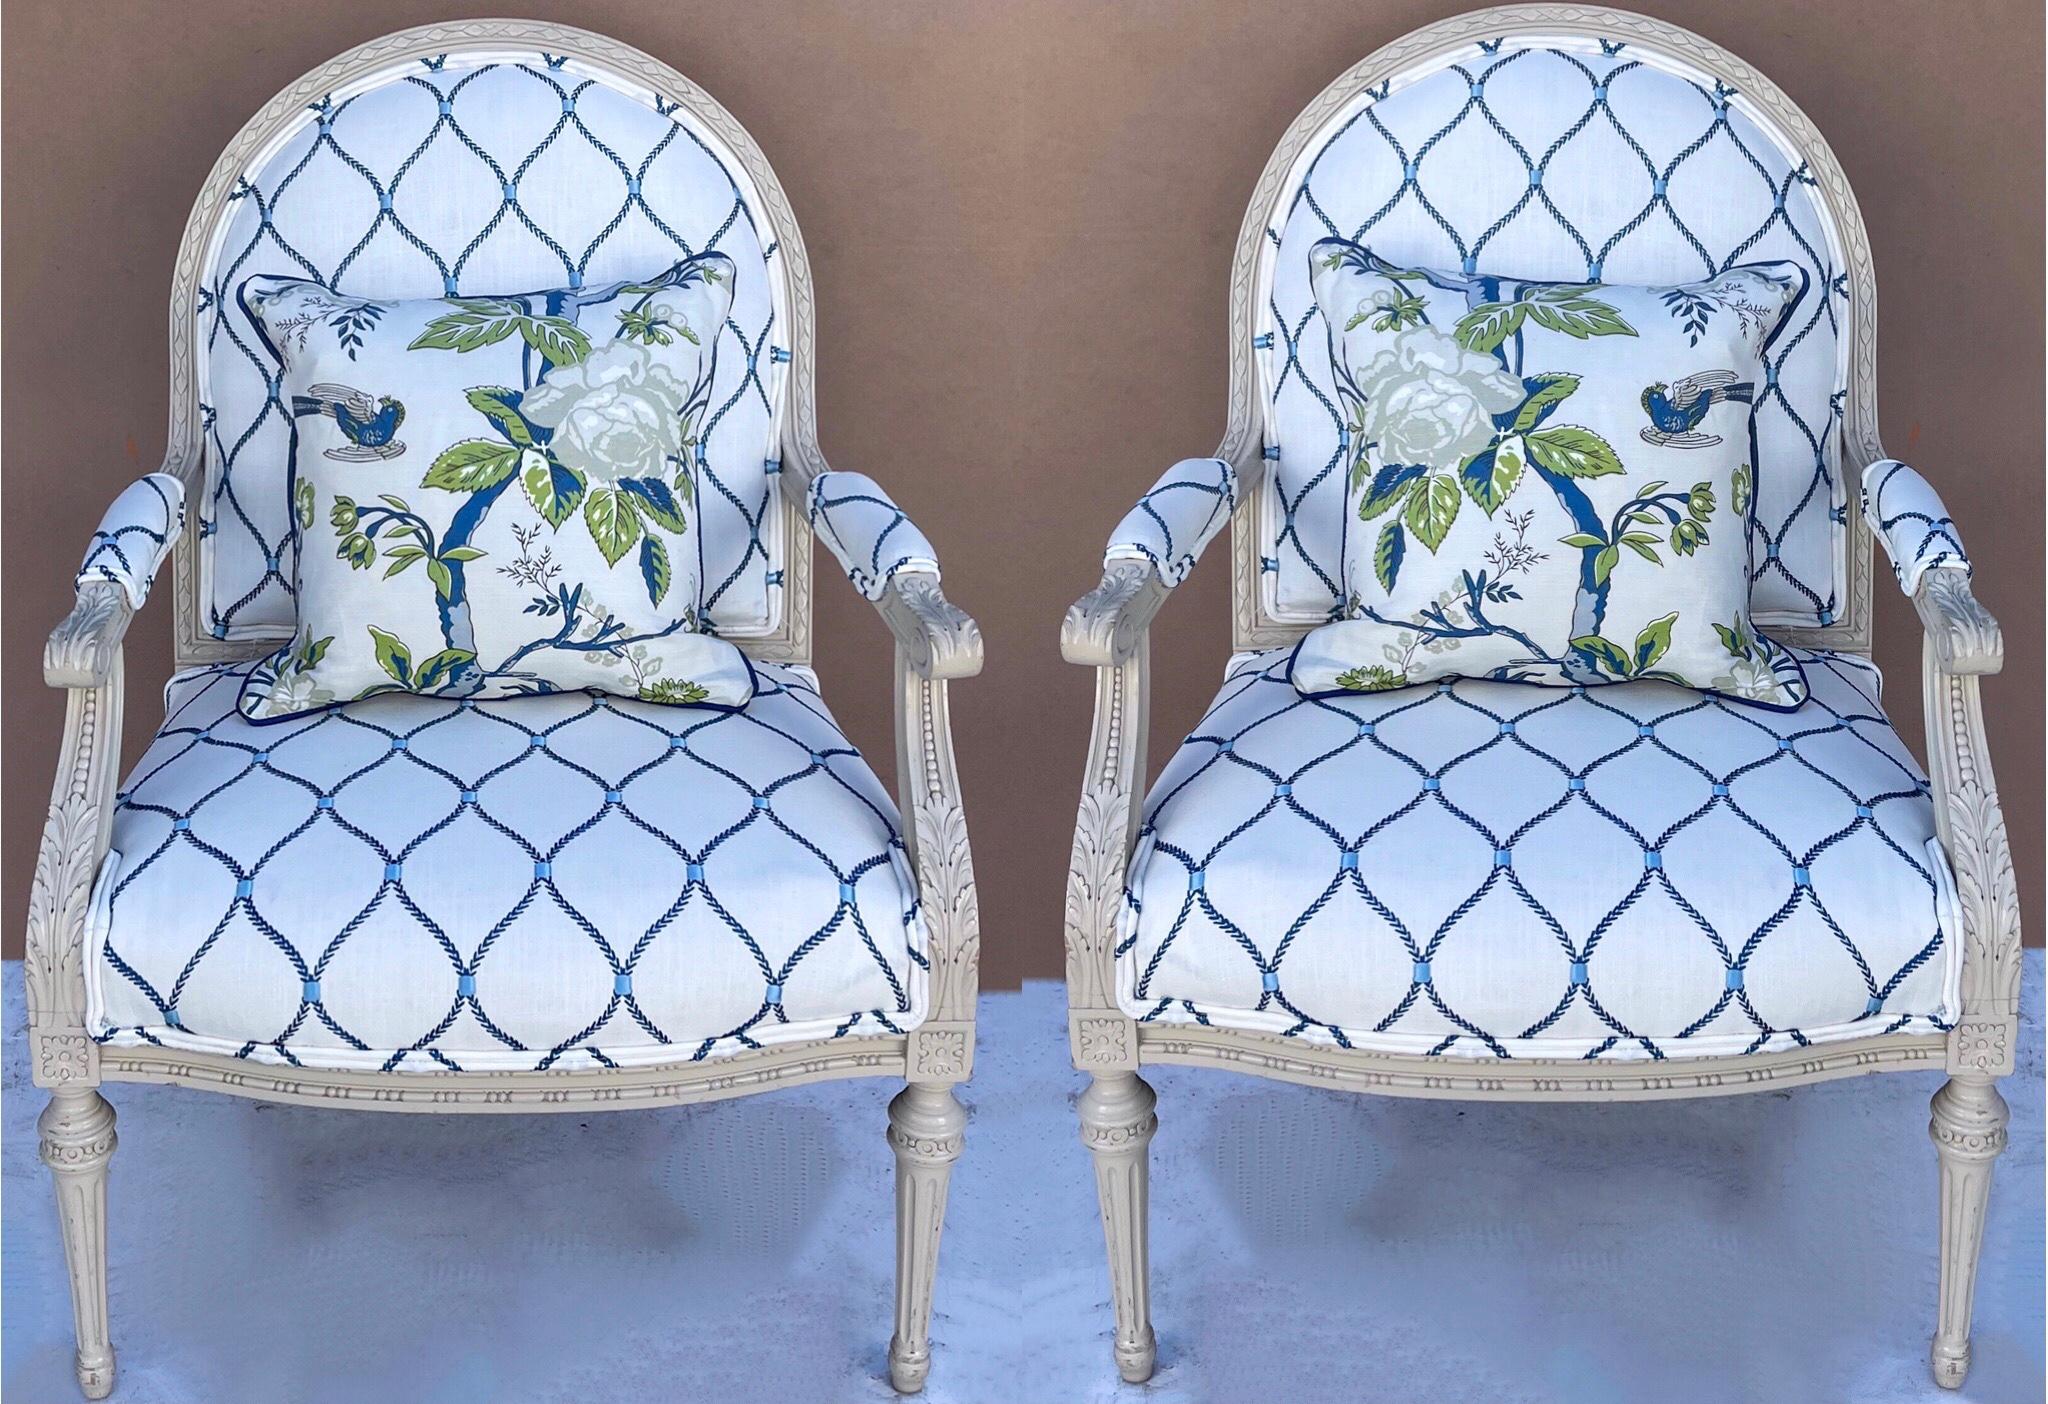 20th Century Carved French Style Chairs In Blue And White Travers Fabric, Pair For Sale 1